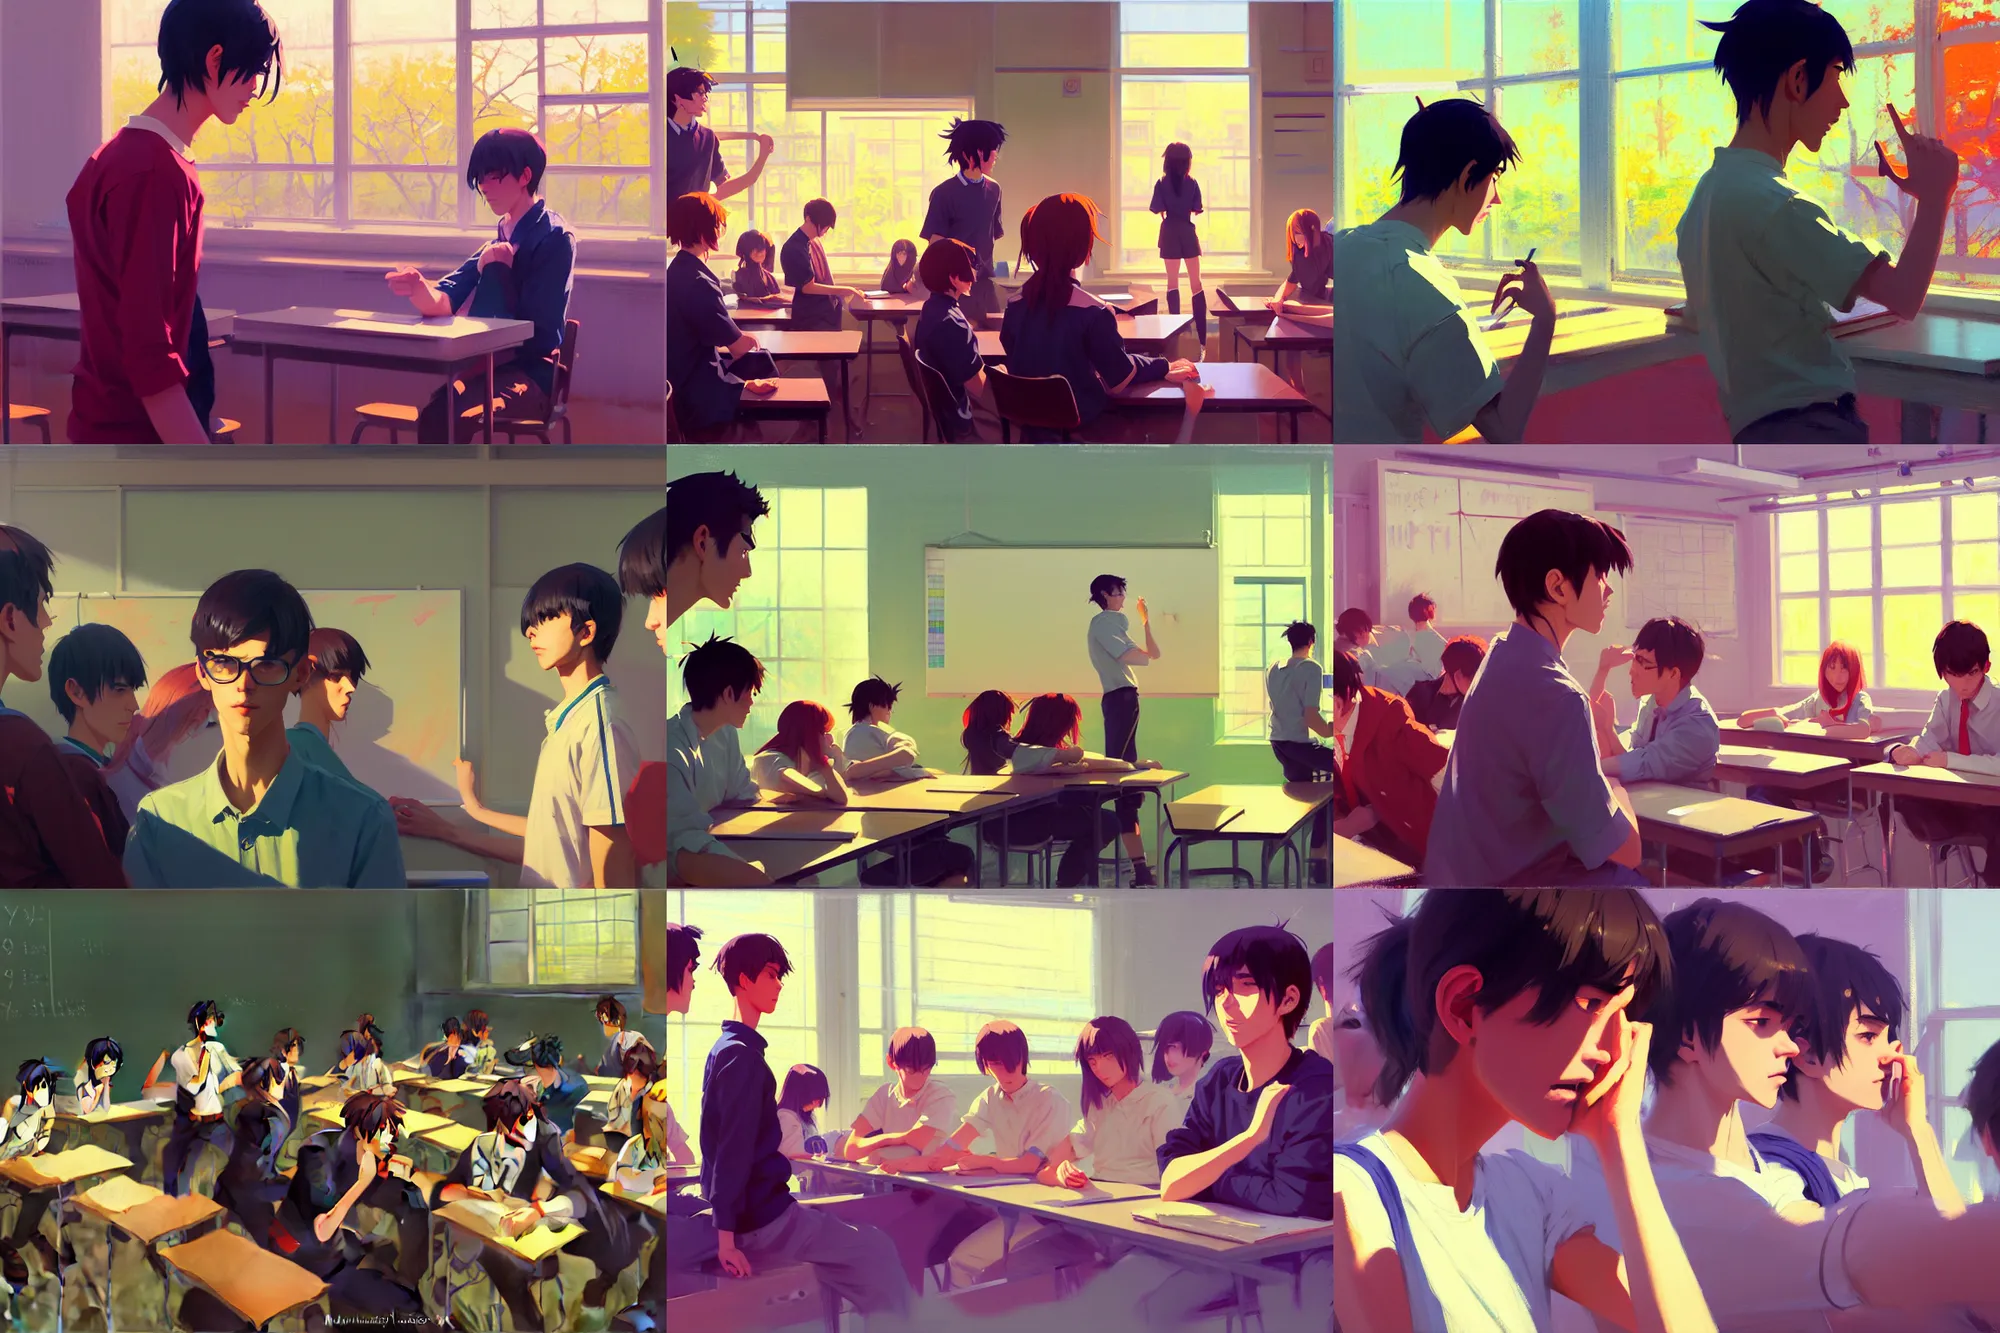 Premium AI Image  Anime Classroom Scene with Beautifully Detailed Art  Style and Group of Students Engaged in Learning